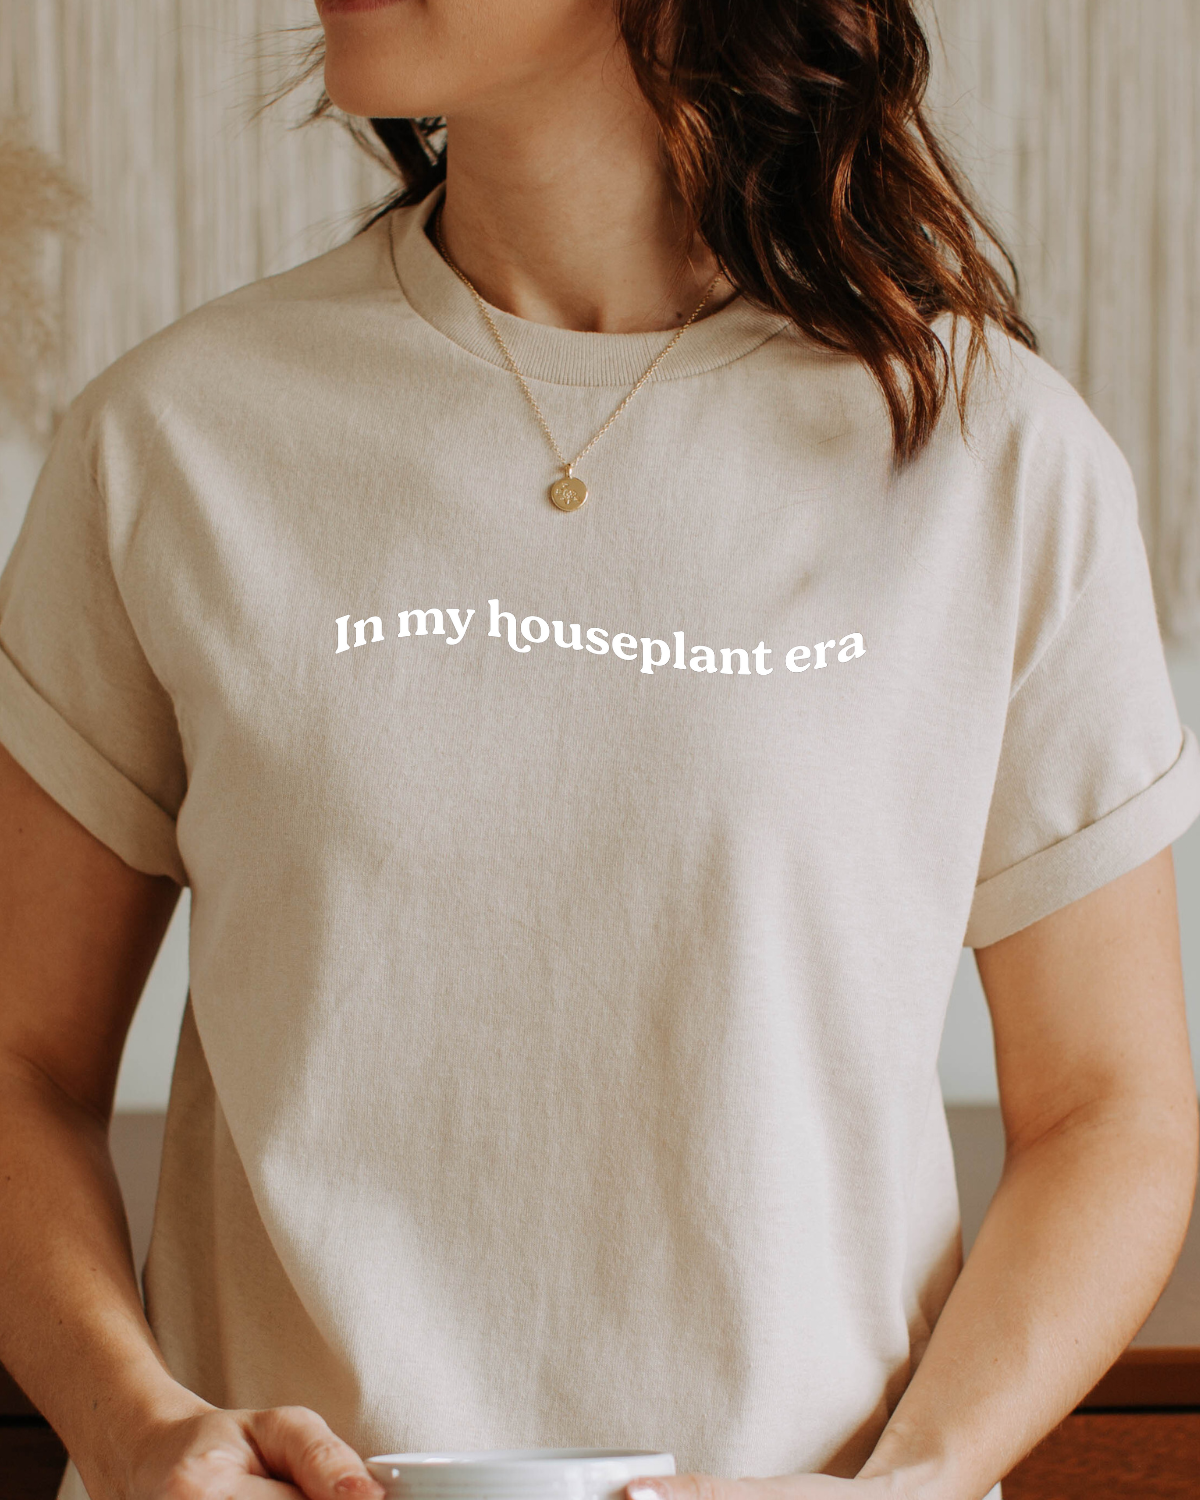 Houseplant Era Graphic T-Shirt | Gifts for Plant Lovers, Small